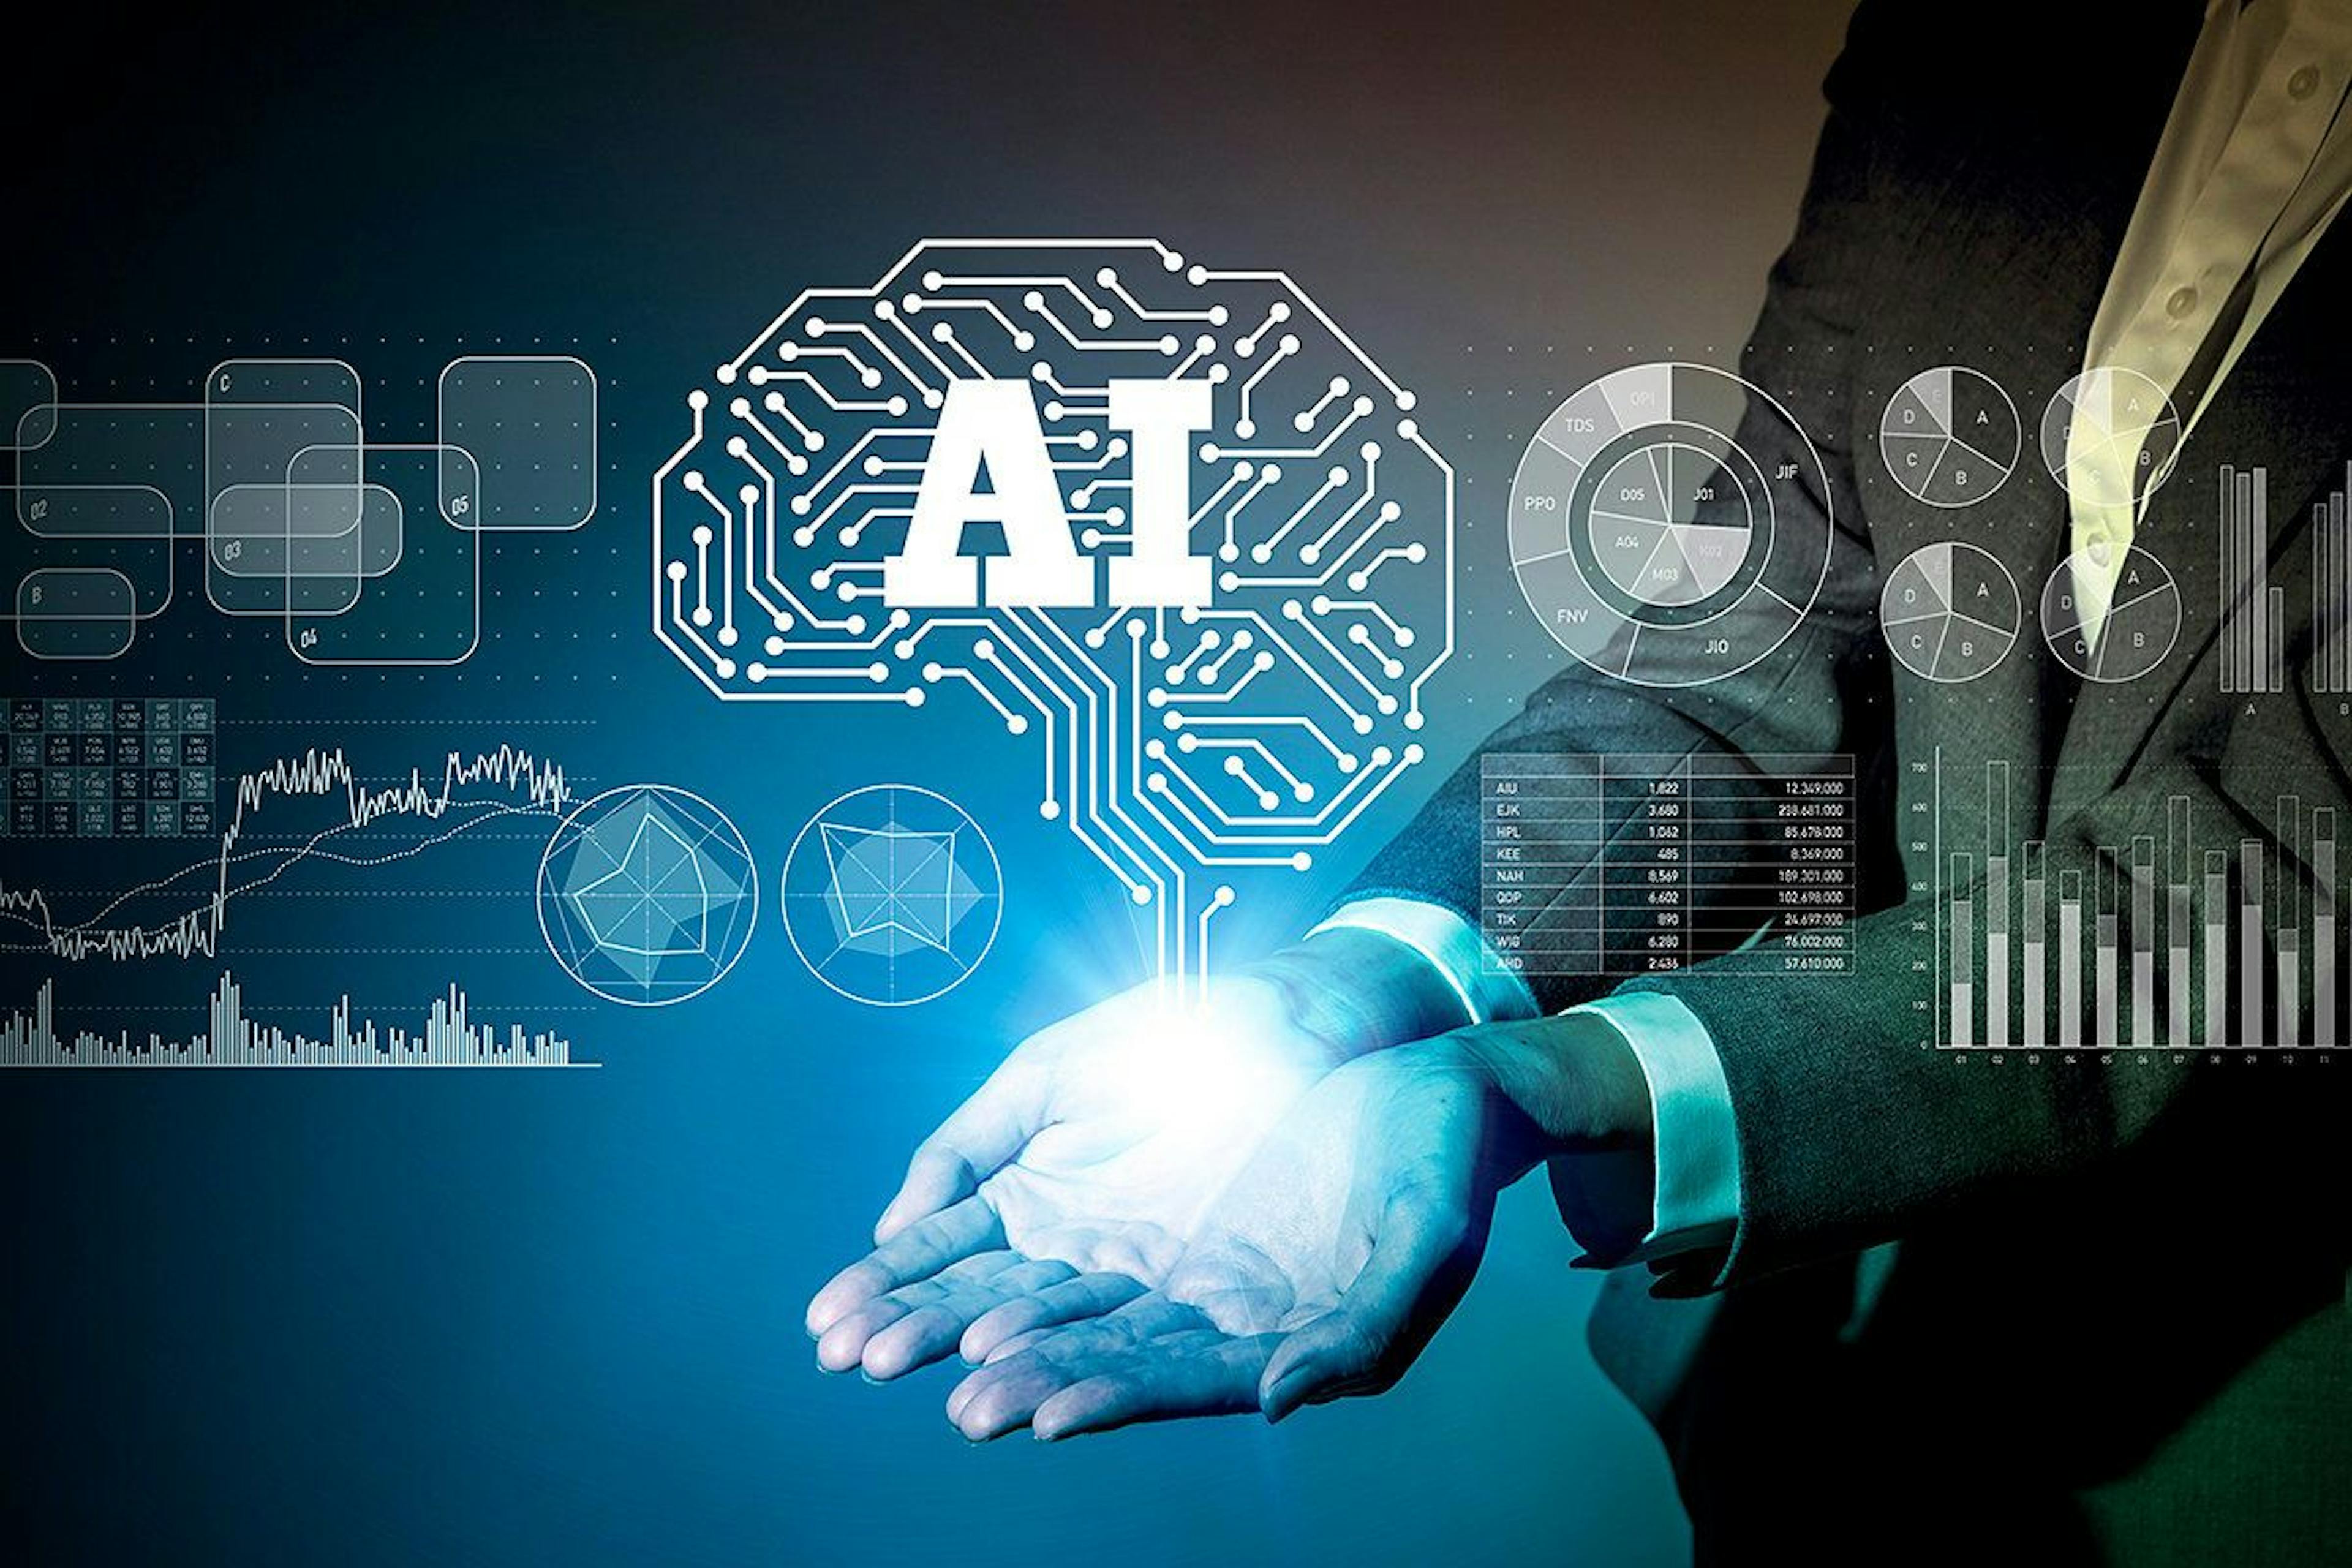 /top-5-trends-of-artificial-intelligence-ai-2019-693f7a5a0f7b feature image